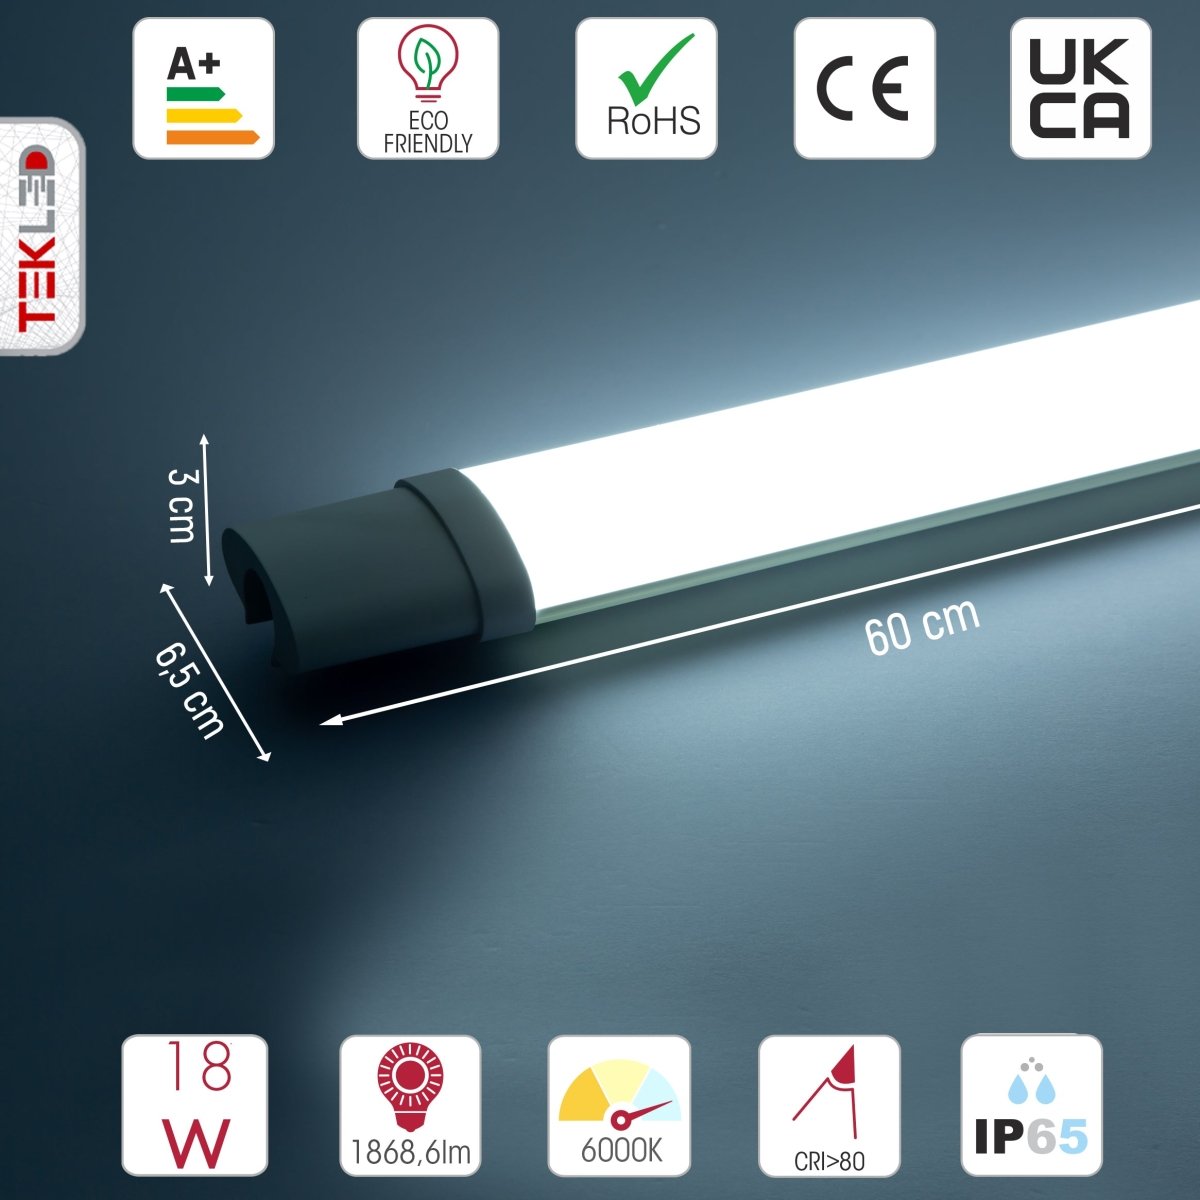 Technical specs and measurements for LED Tri-proof Slim Batten Linear Fitting 18W 6500K Cool Daylight IP65 60cm 2ft